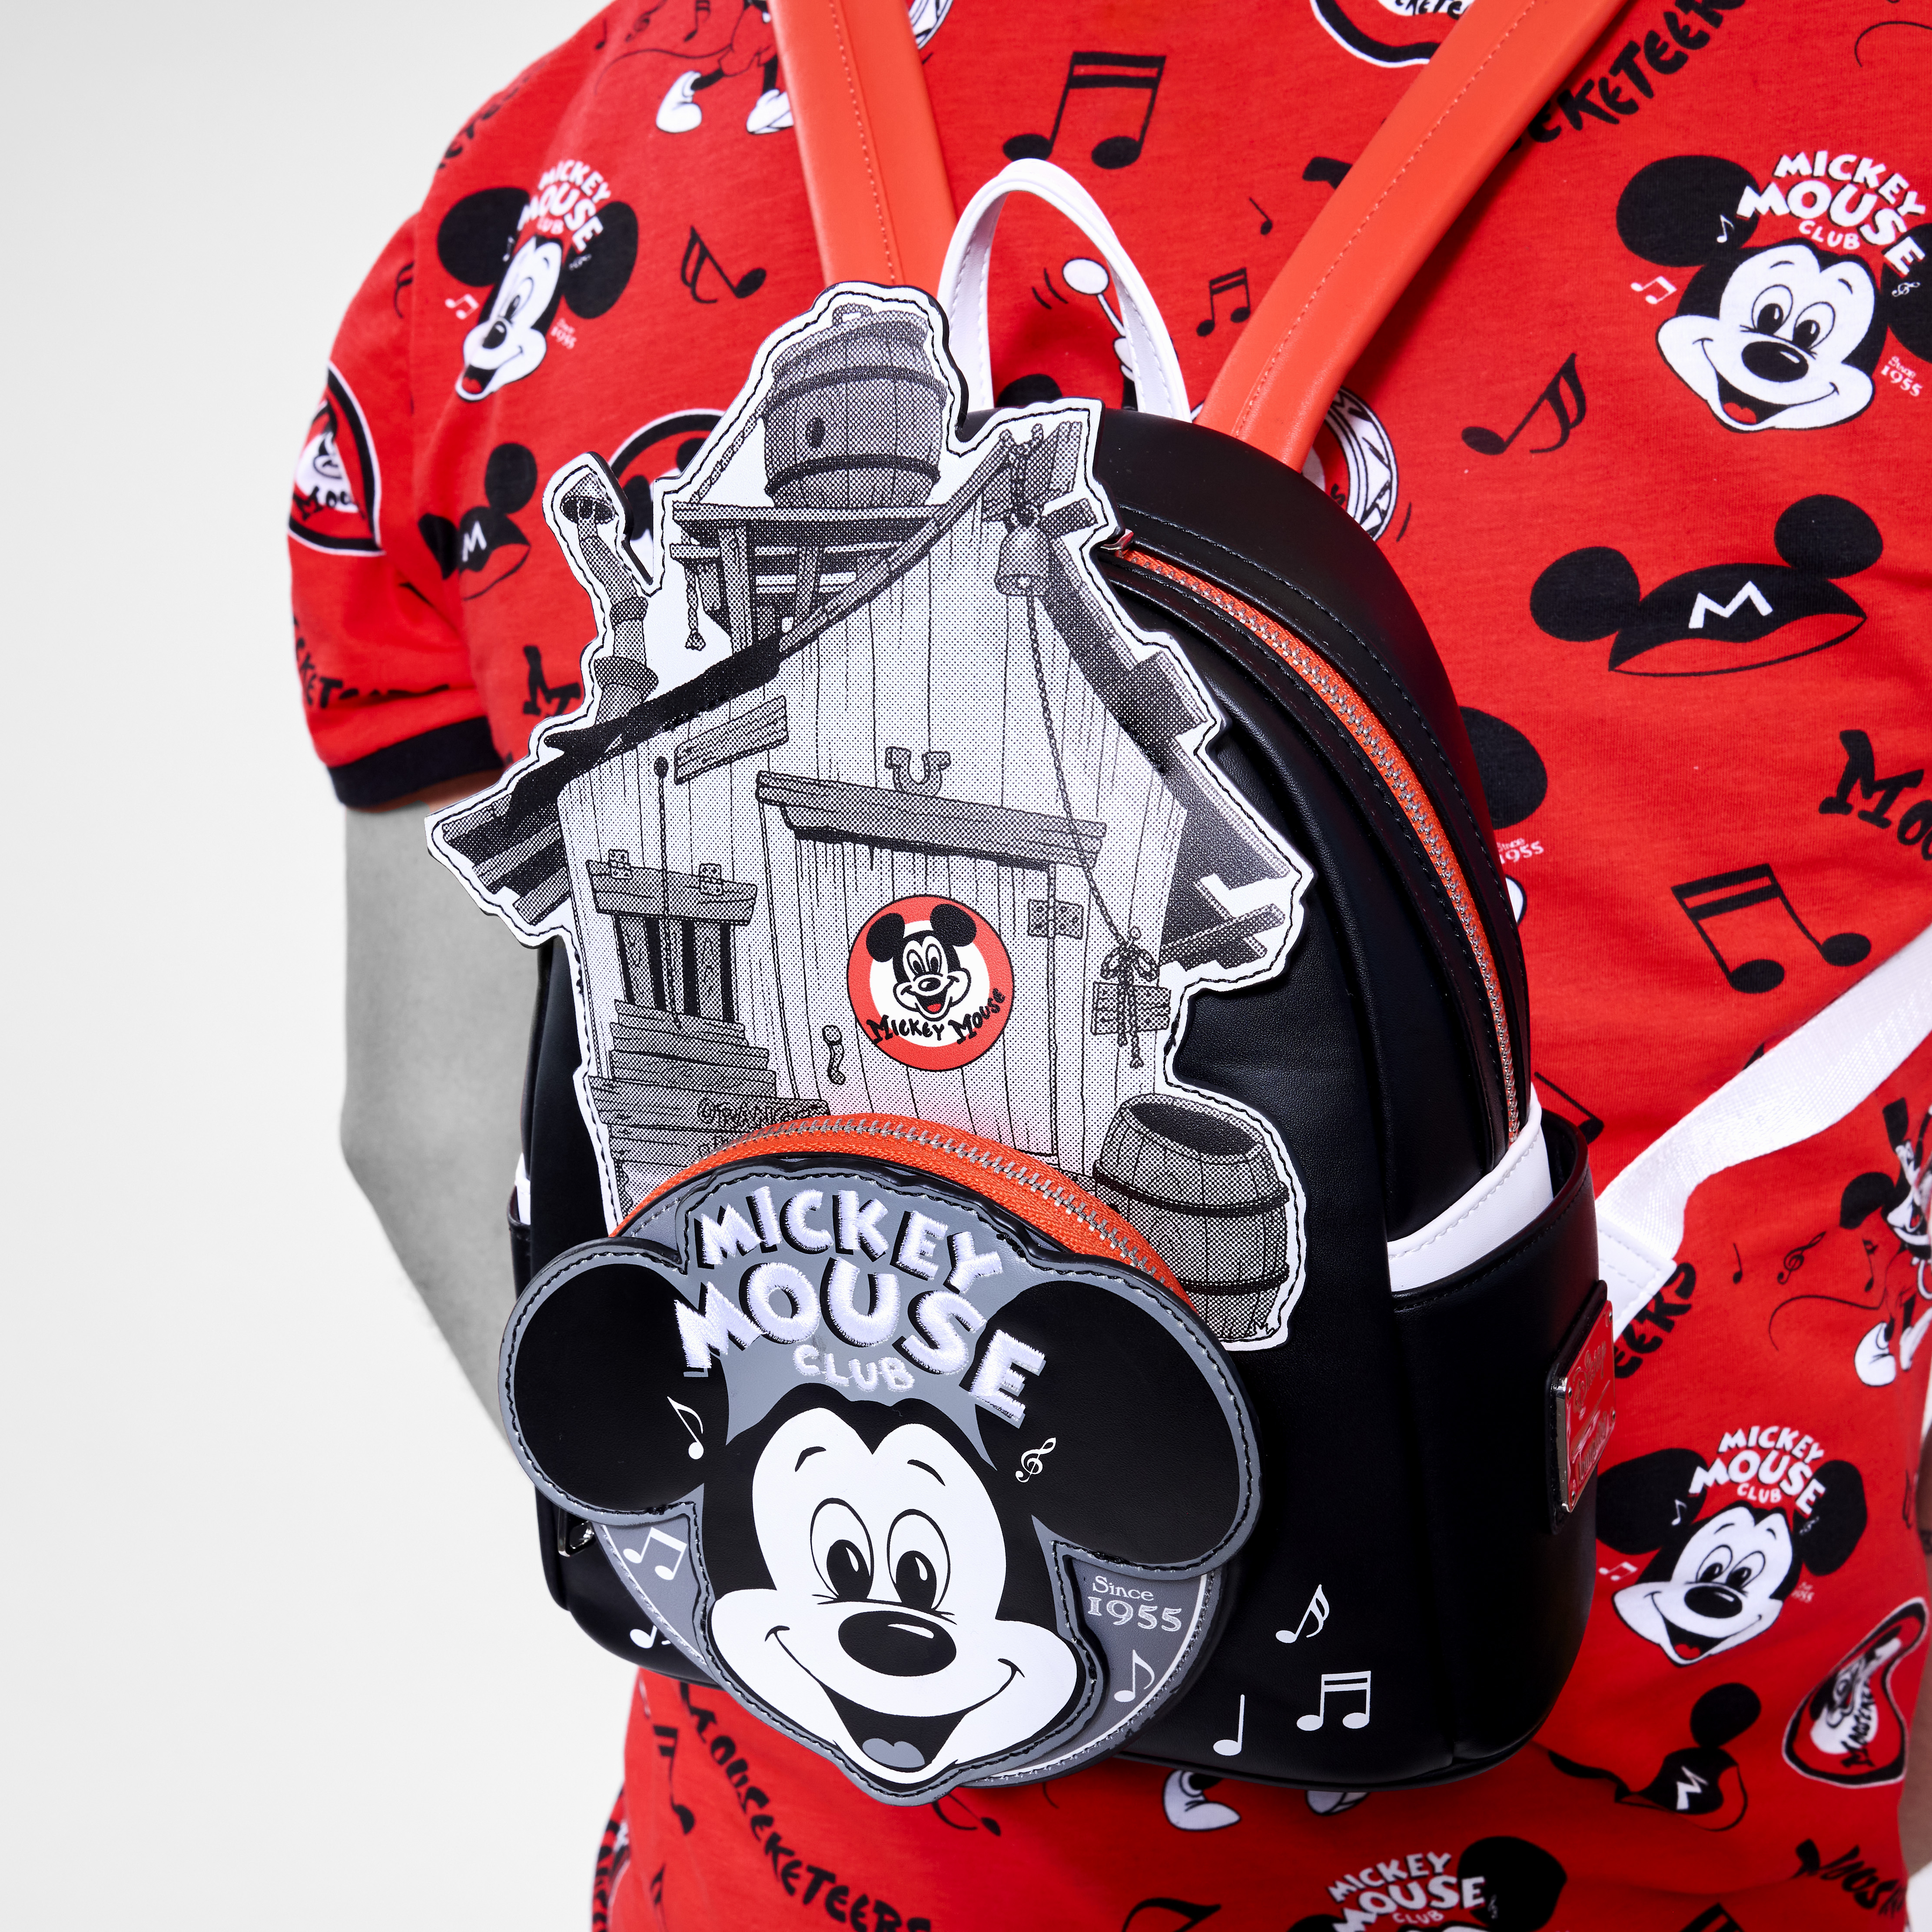 A man wears the Loungefly Disney100 Mickey Mouse Club Mini Backpack on his back. The backpack shows the Micky Mouse Clubhouse from the original TV series. The backpack appears against a red tee-shirt featuring an allover print of Mickey Mouse motifs.